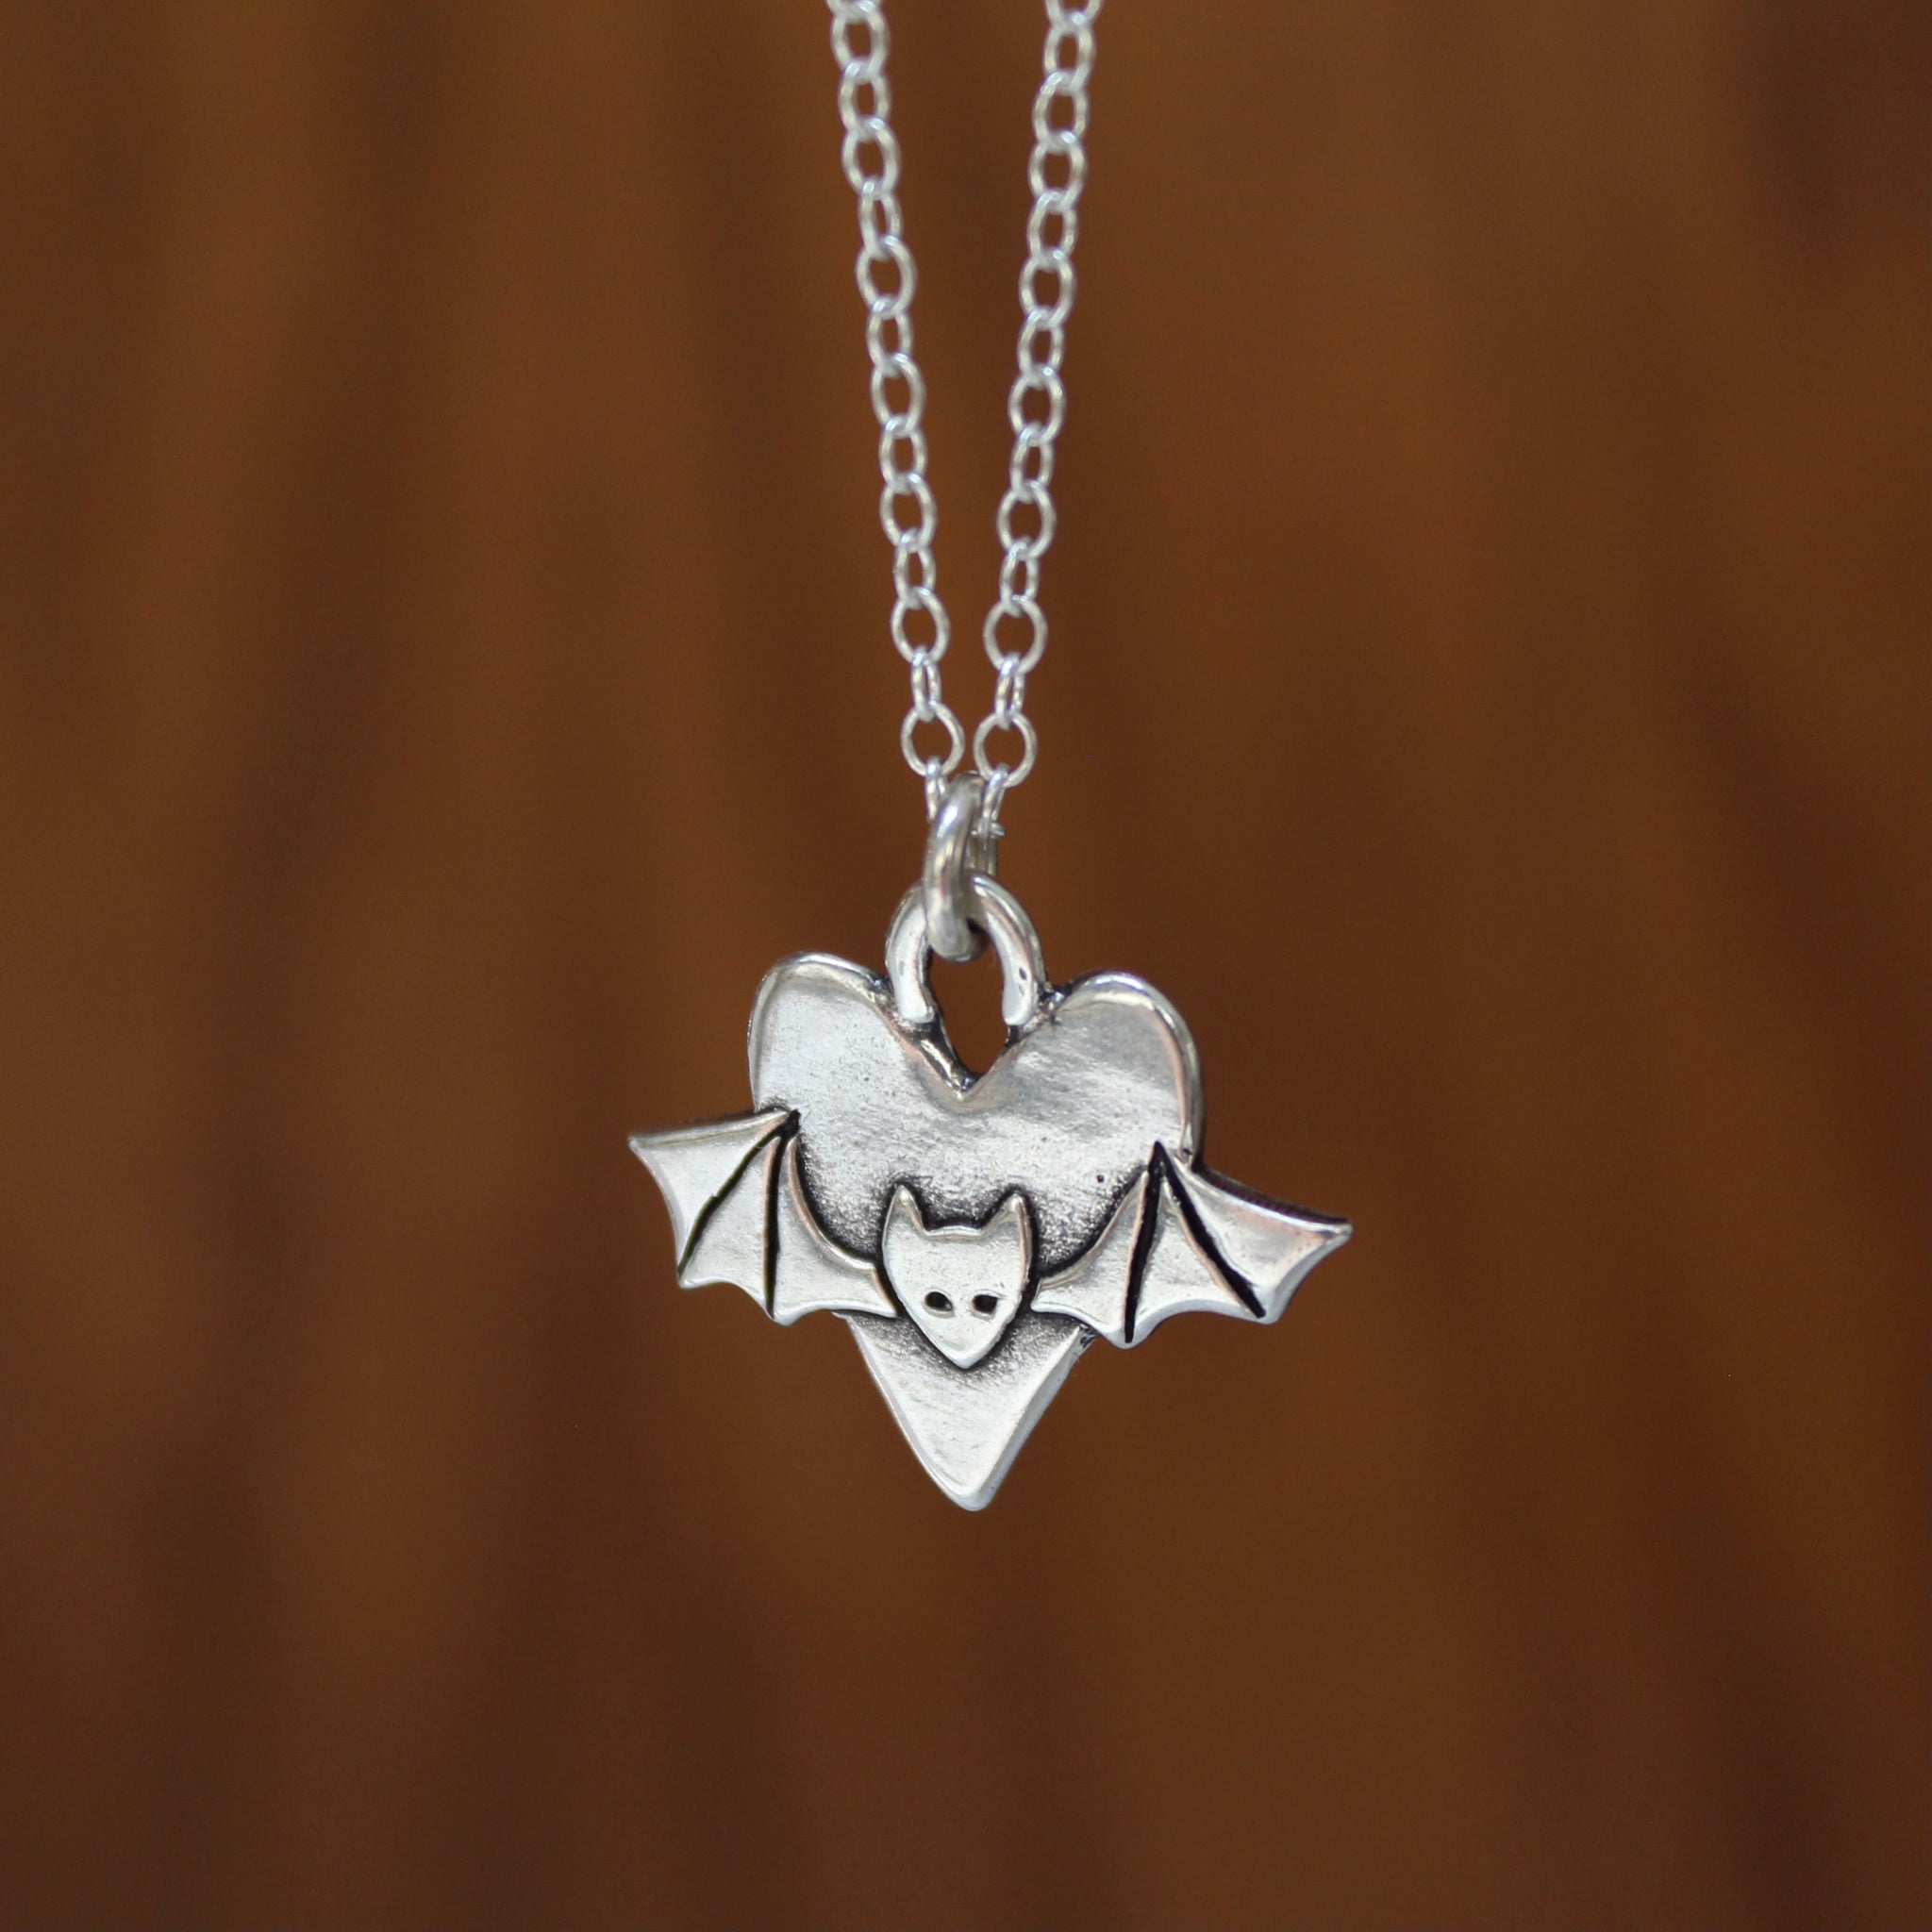 Buy Sterling Silver Hanging Bat Pendant on Chain Online in India - Etsy